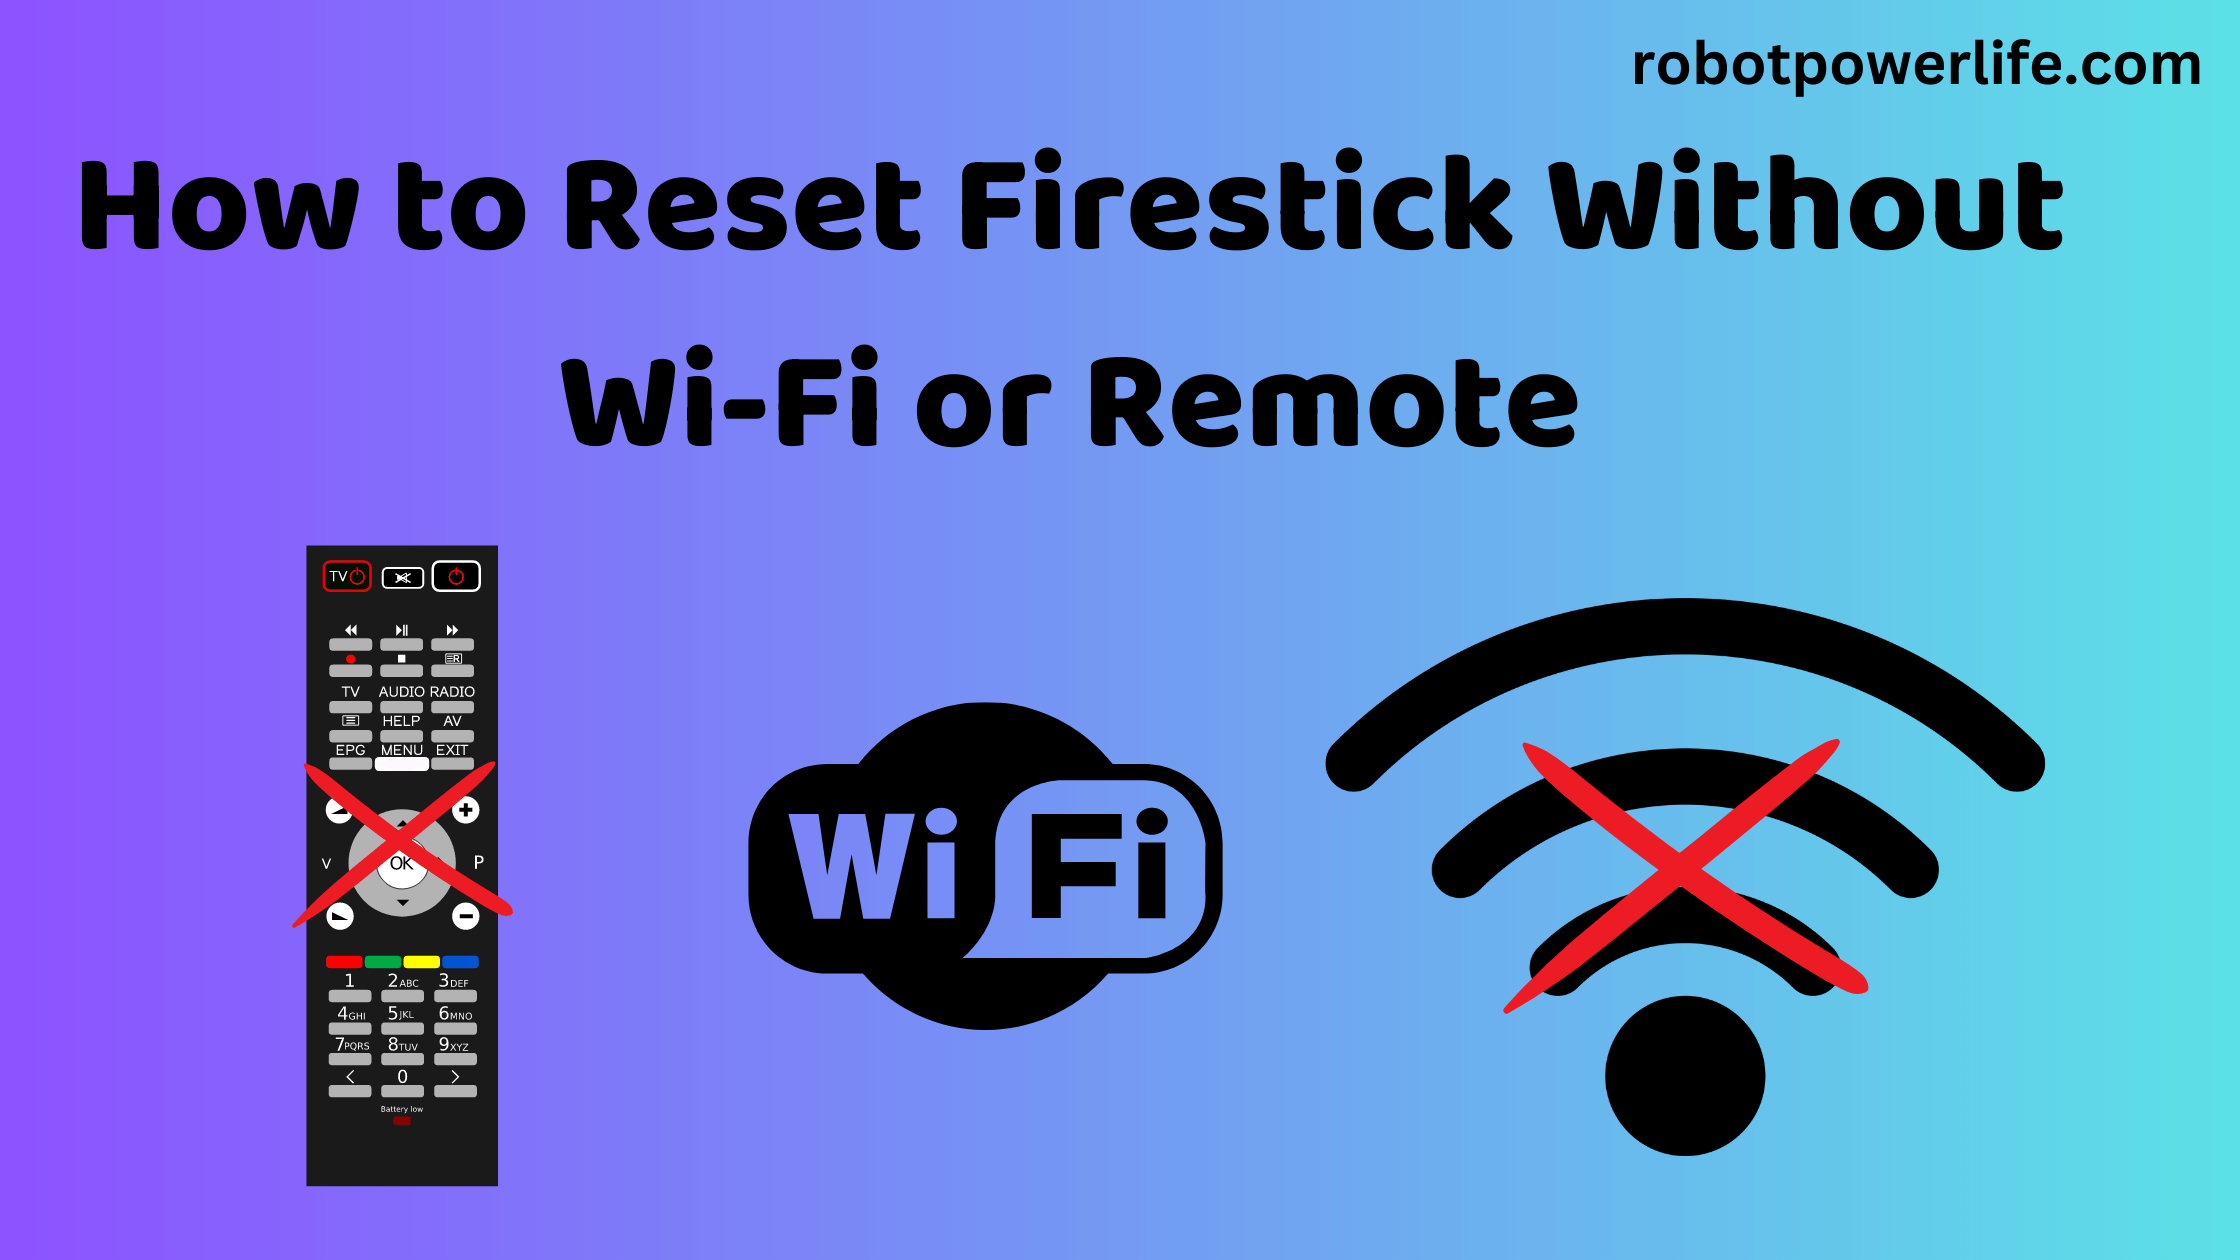 How to Reset Firestick Without Wi-Fi or Remote